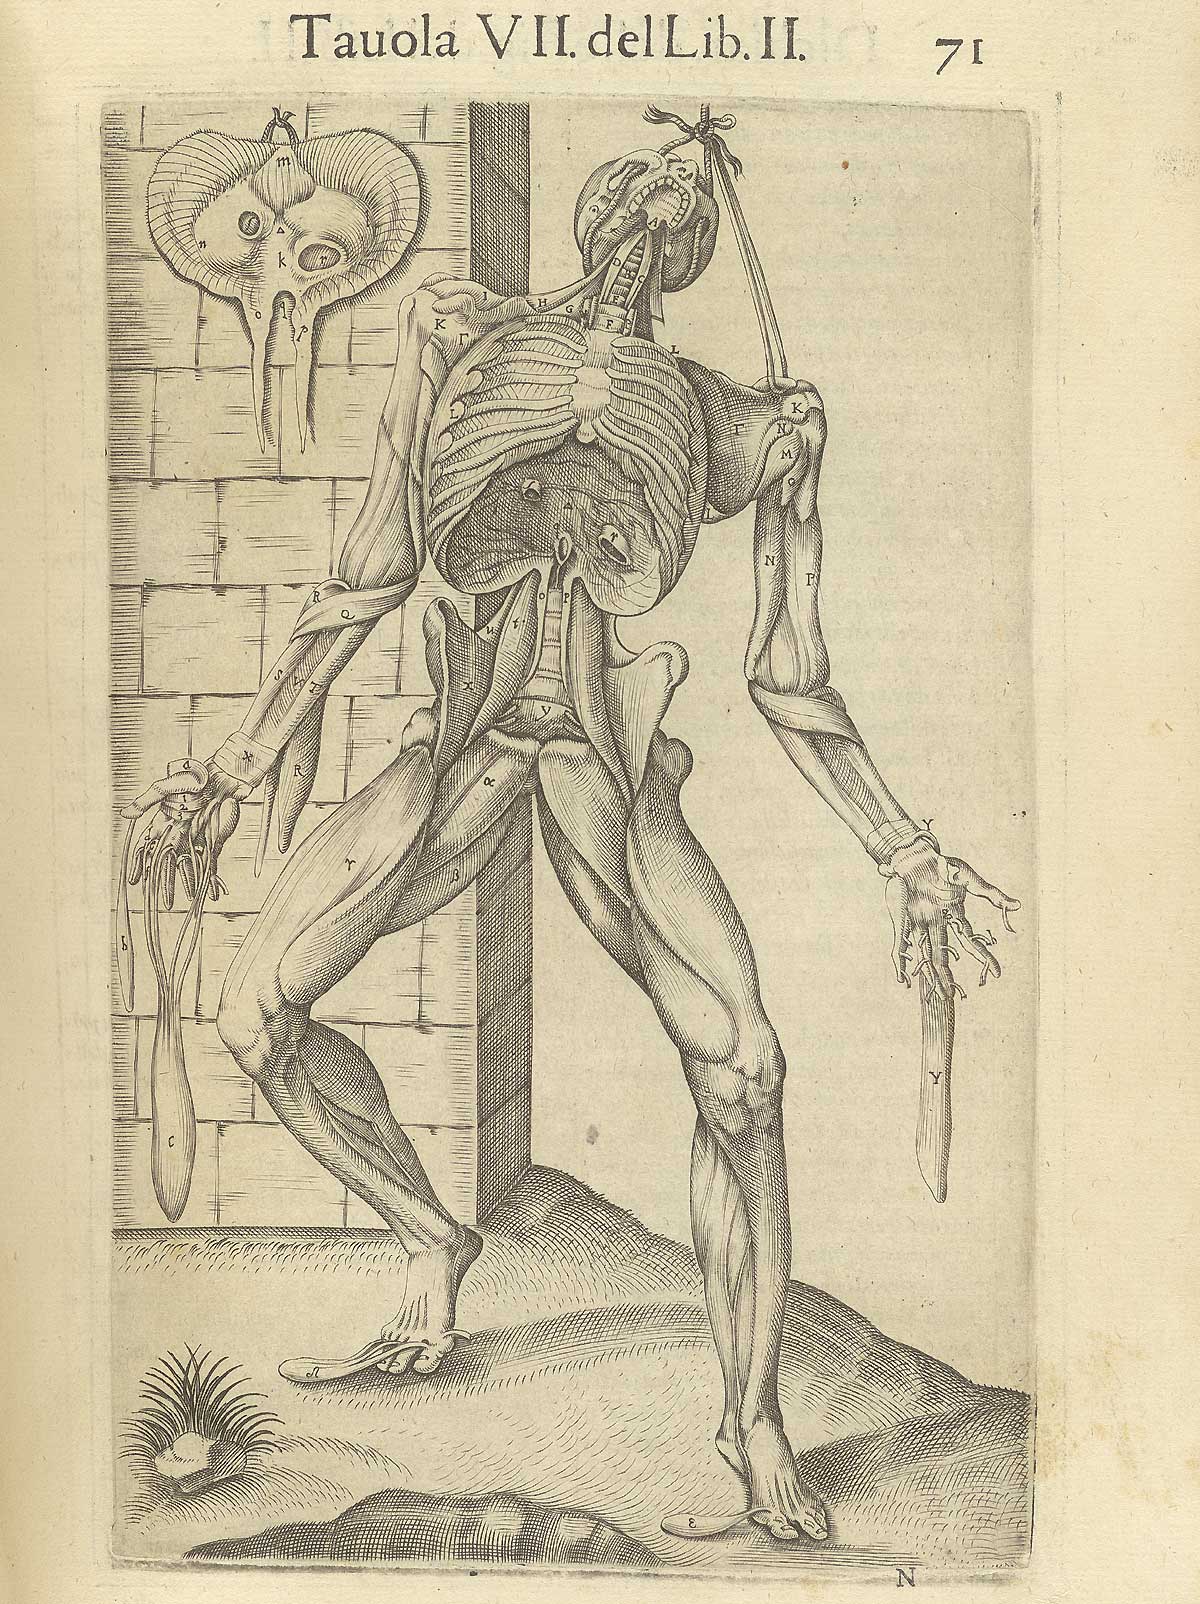 Page 71 of Juan Valverde de Amusco's Anatomia del corpo humano, featuring a flayed cadaver hanging by a rope tied around its head and left shoulder with the rib cage exposed.